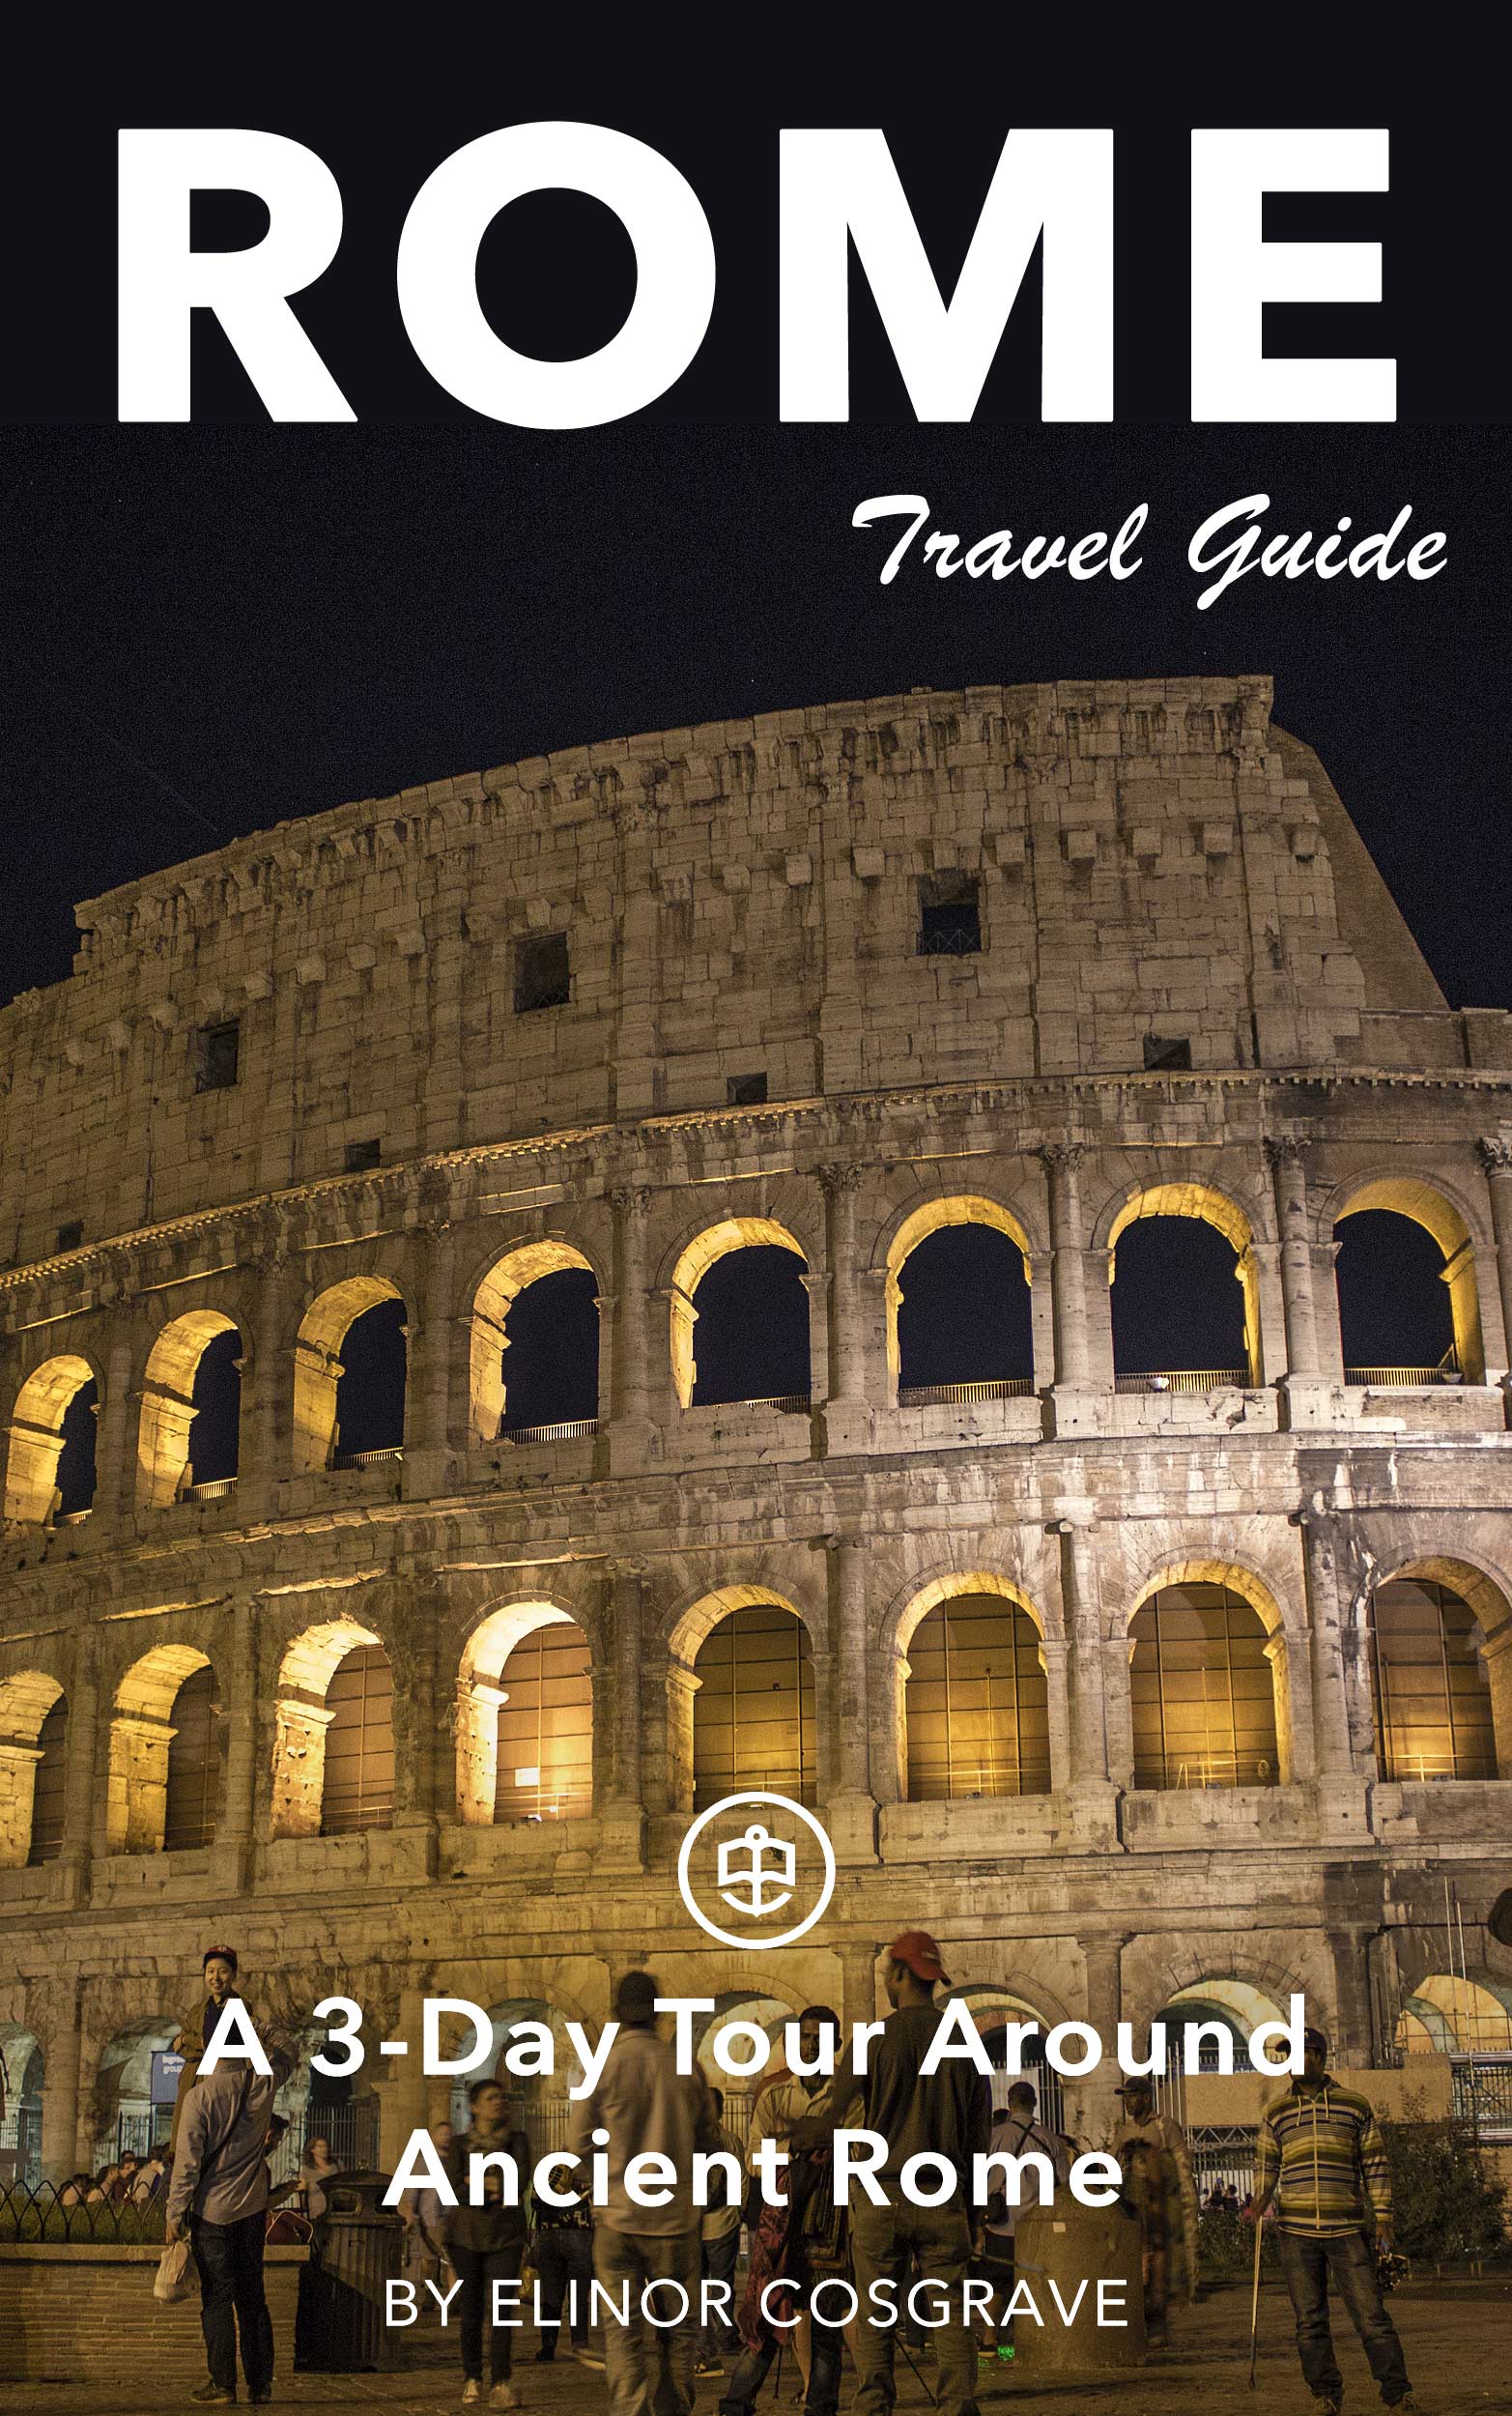 A 3-Day Tour Around Ancient Rome